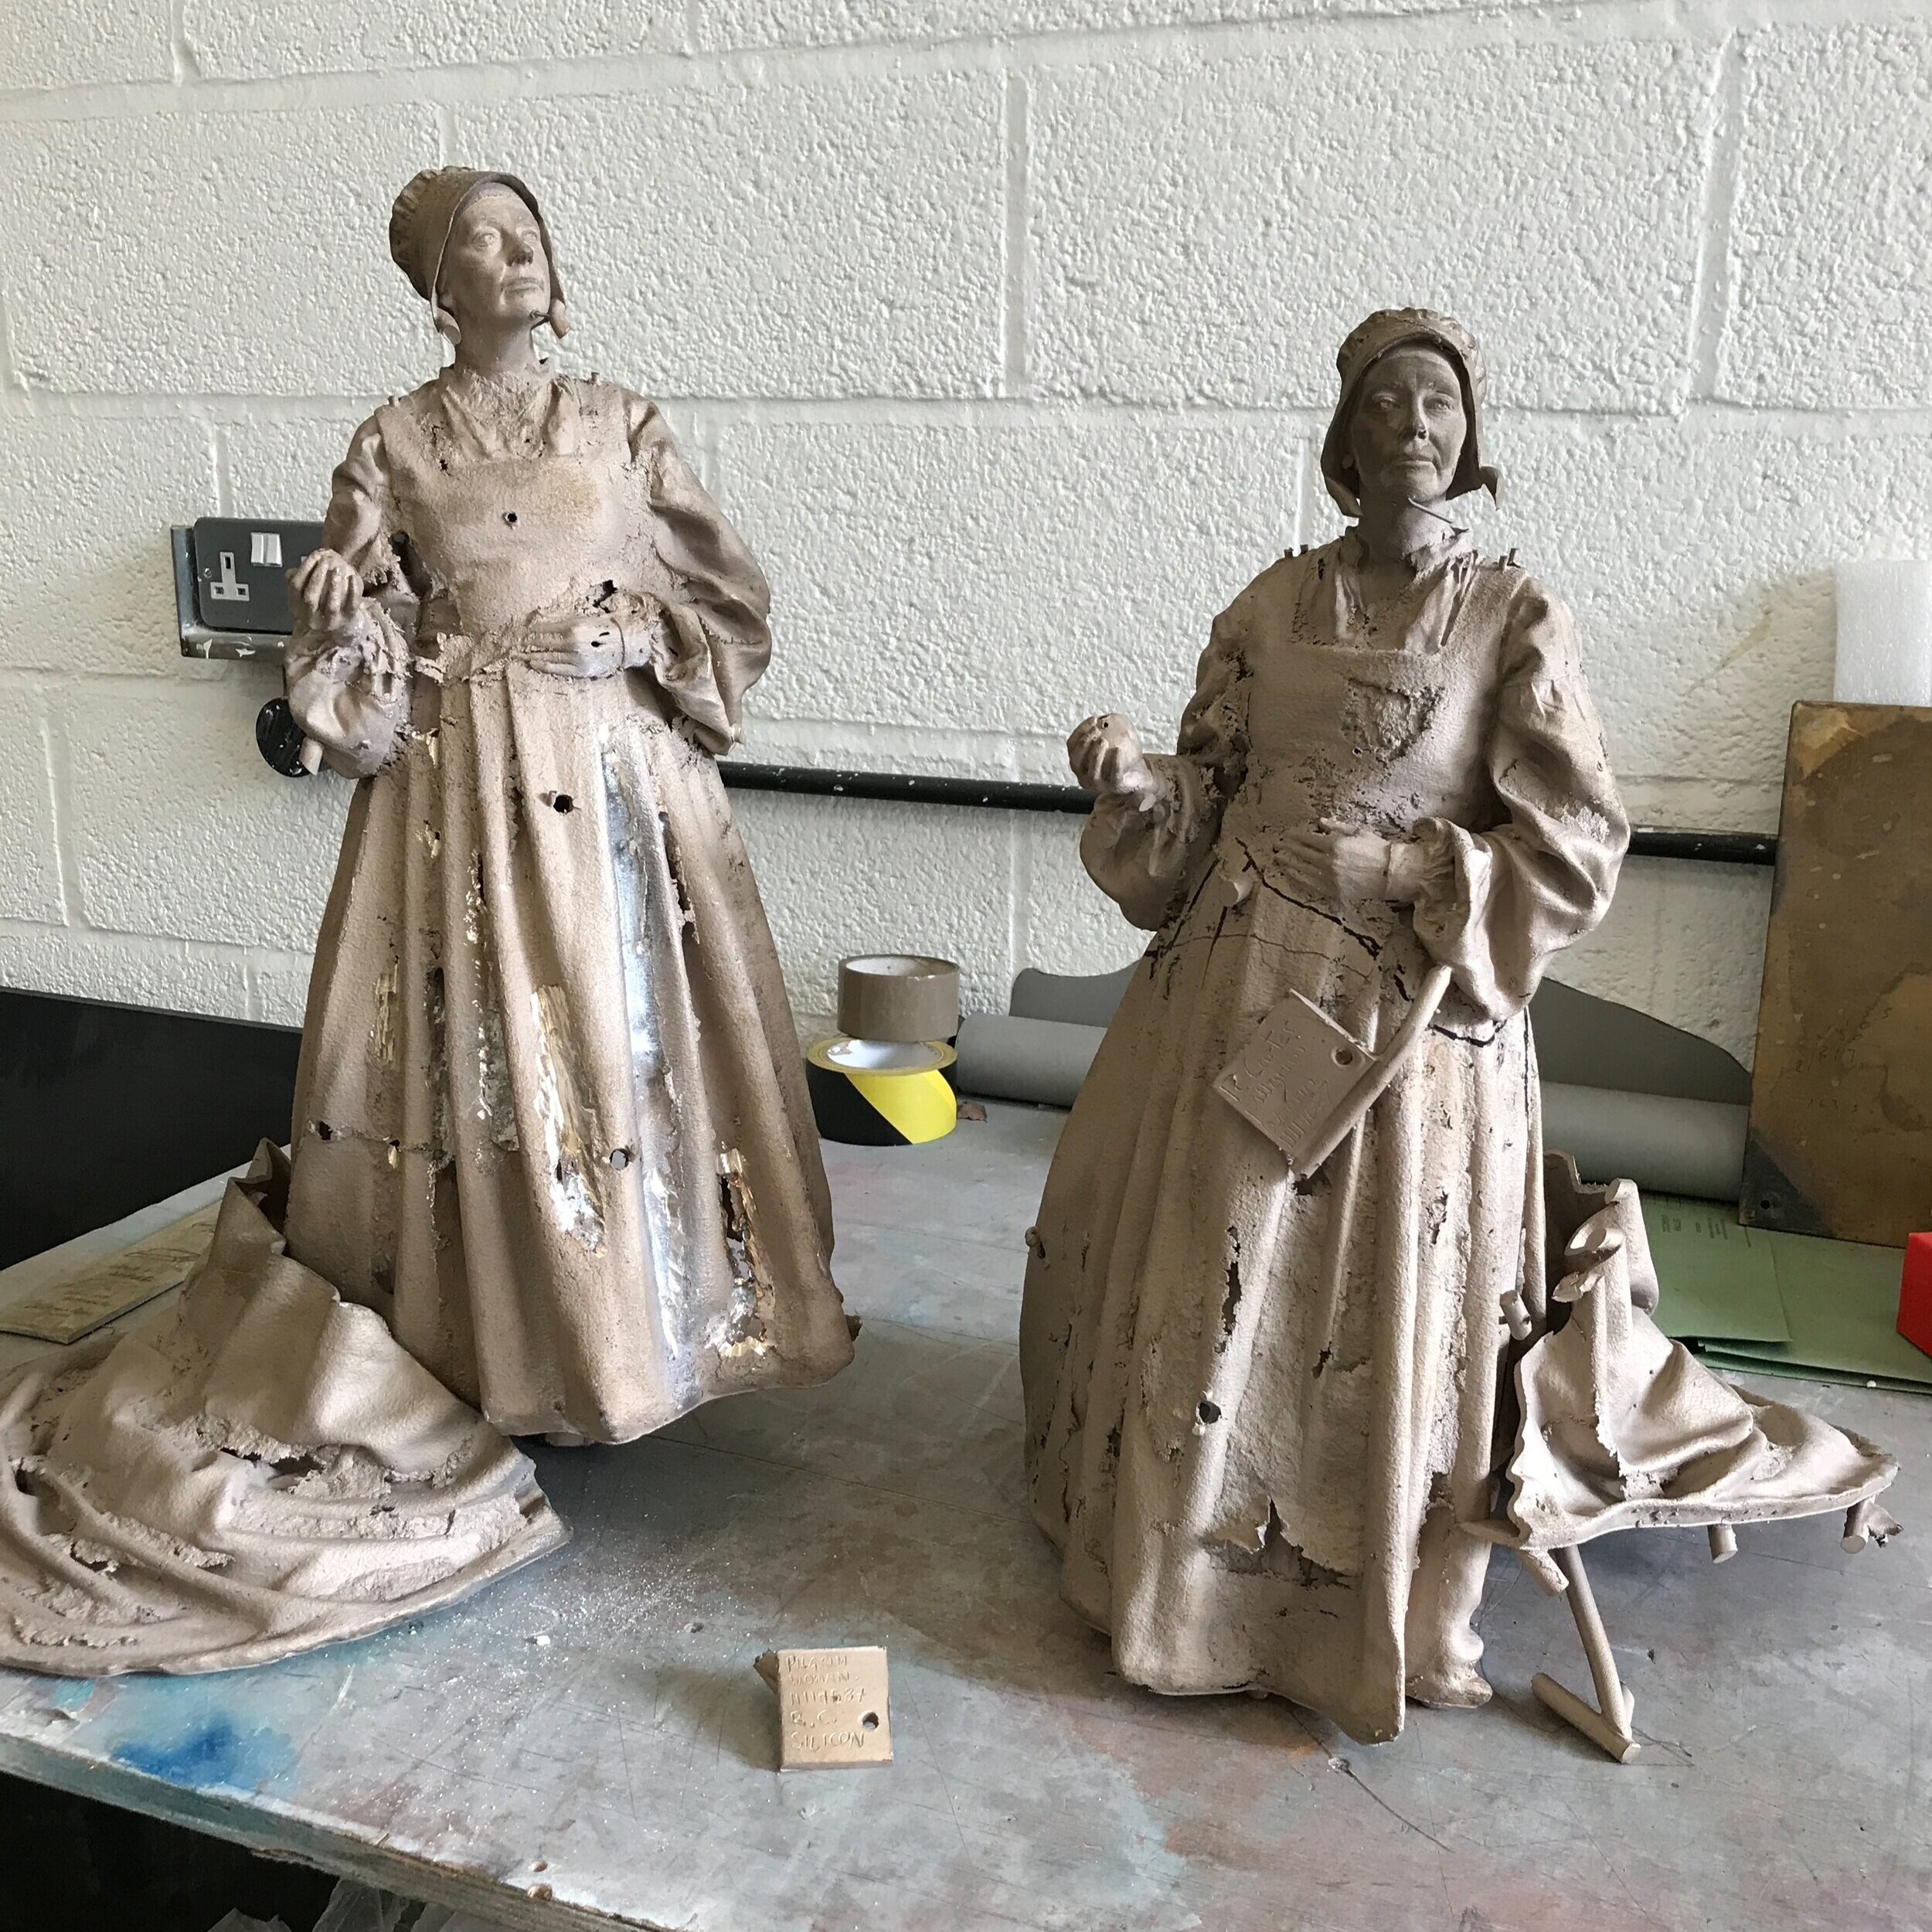 Two Pilgrims after casting